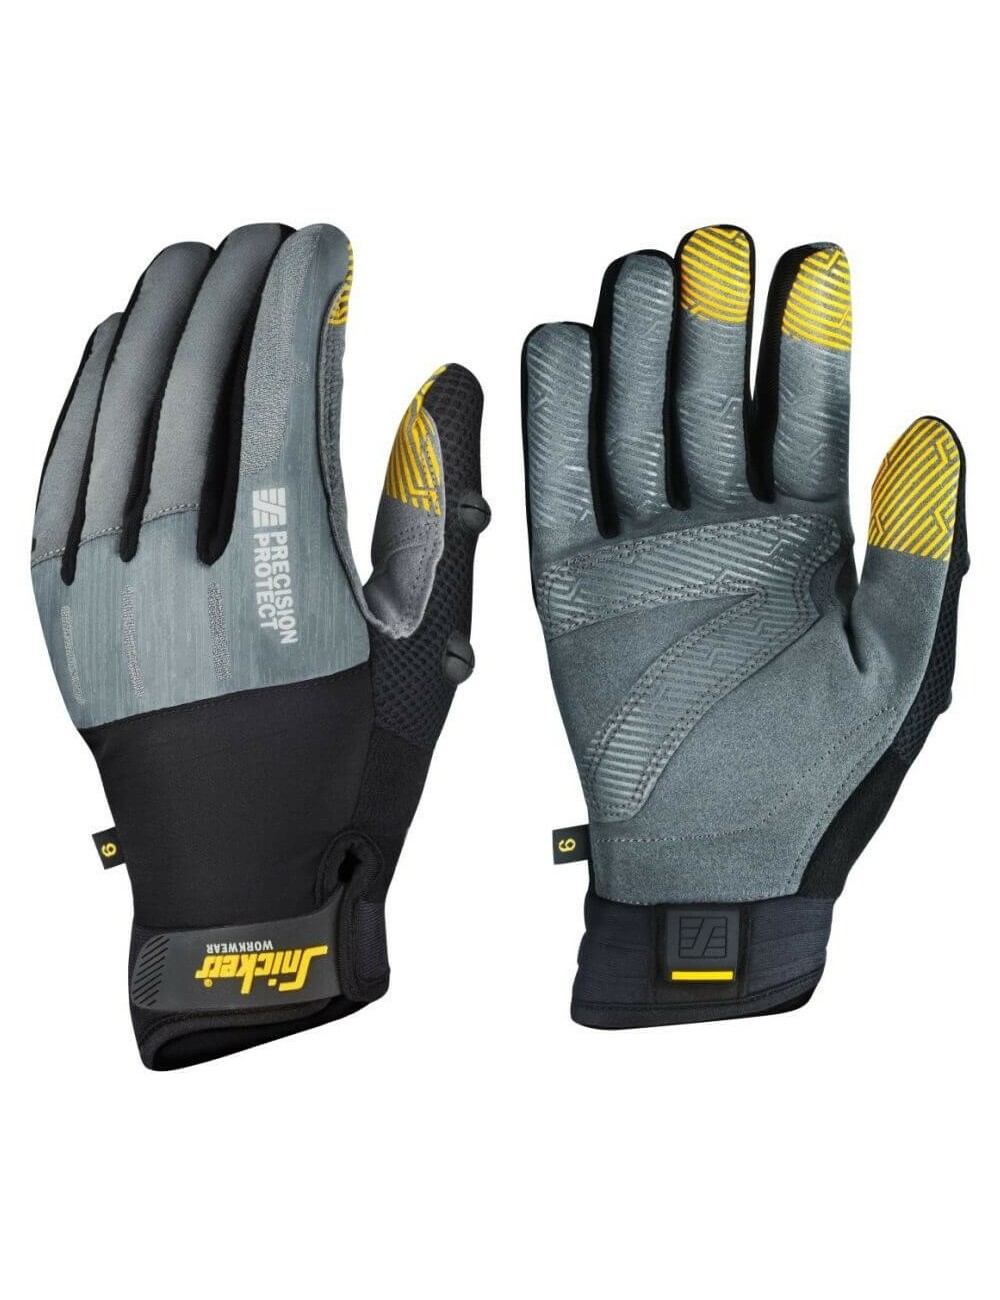 Snickers 9574 Precision Protect work gloves